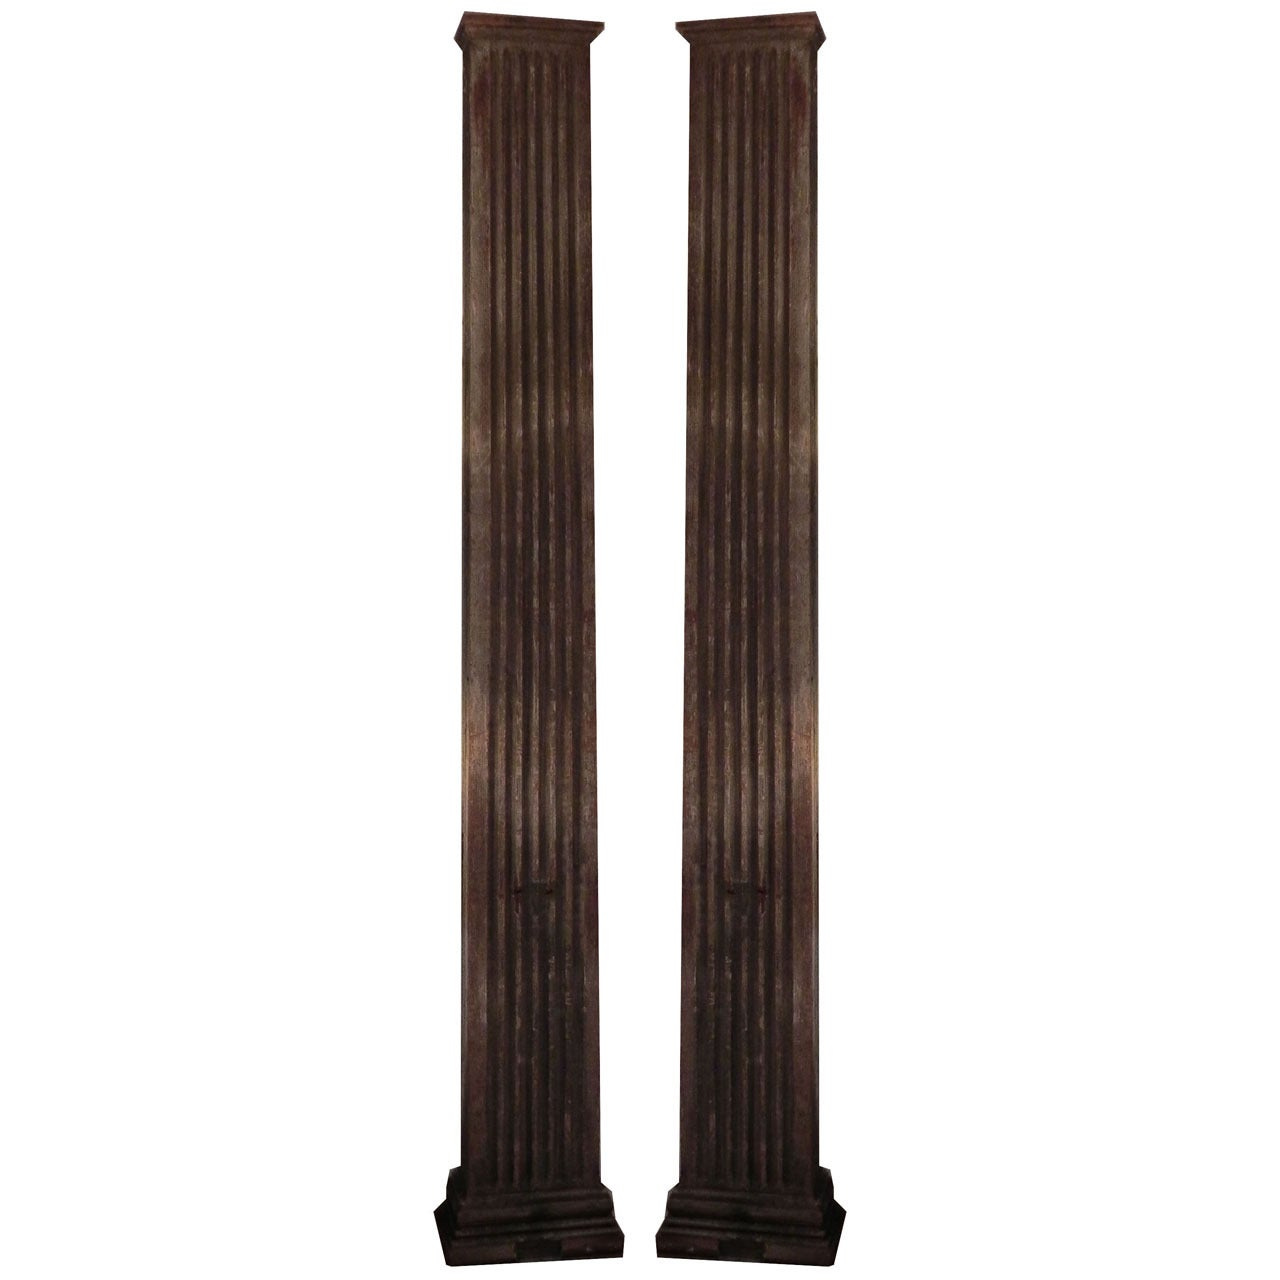 Late 19th c. Fluted Pilasters